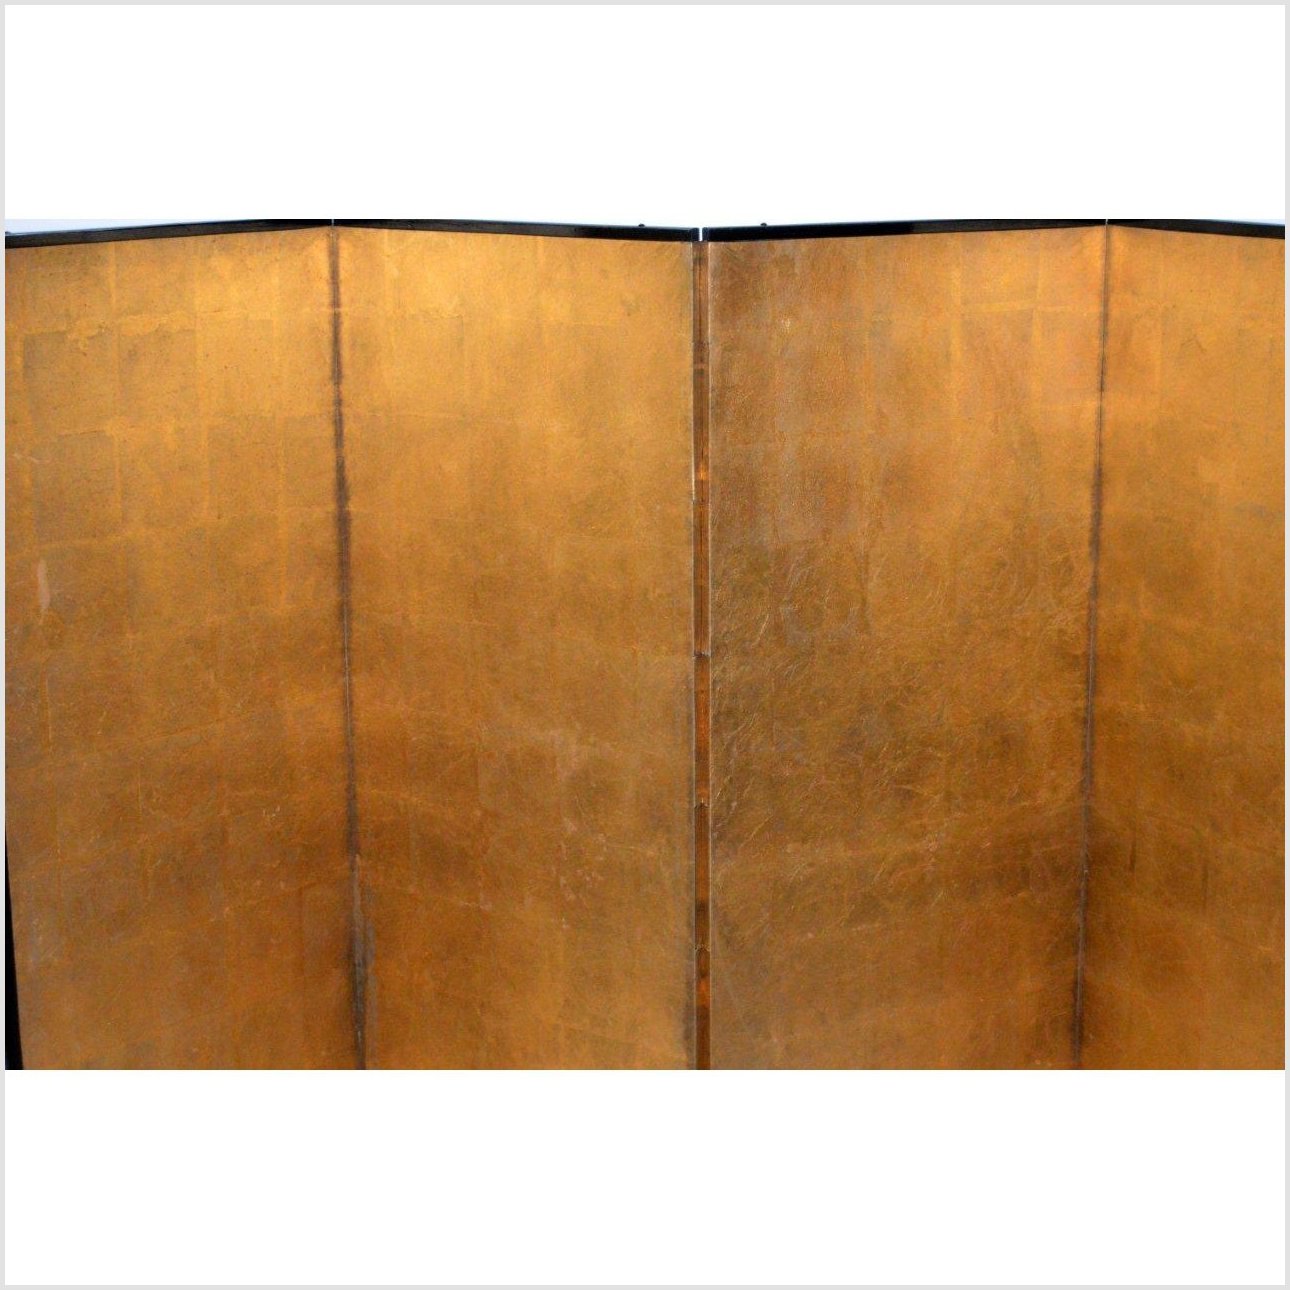 4-Panel Screen with a Fading Gold Tone-YN2863-3. Asian & Chinese Furniture, Art, Antiques, Vintage Home Décor for sale at FEA Home